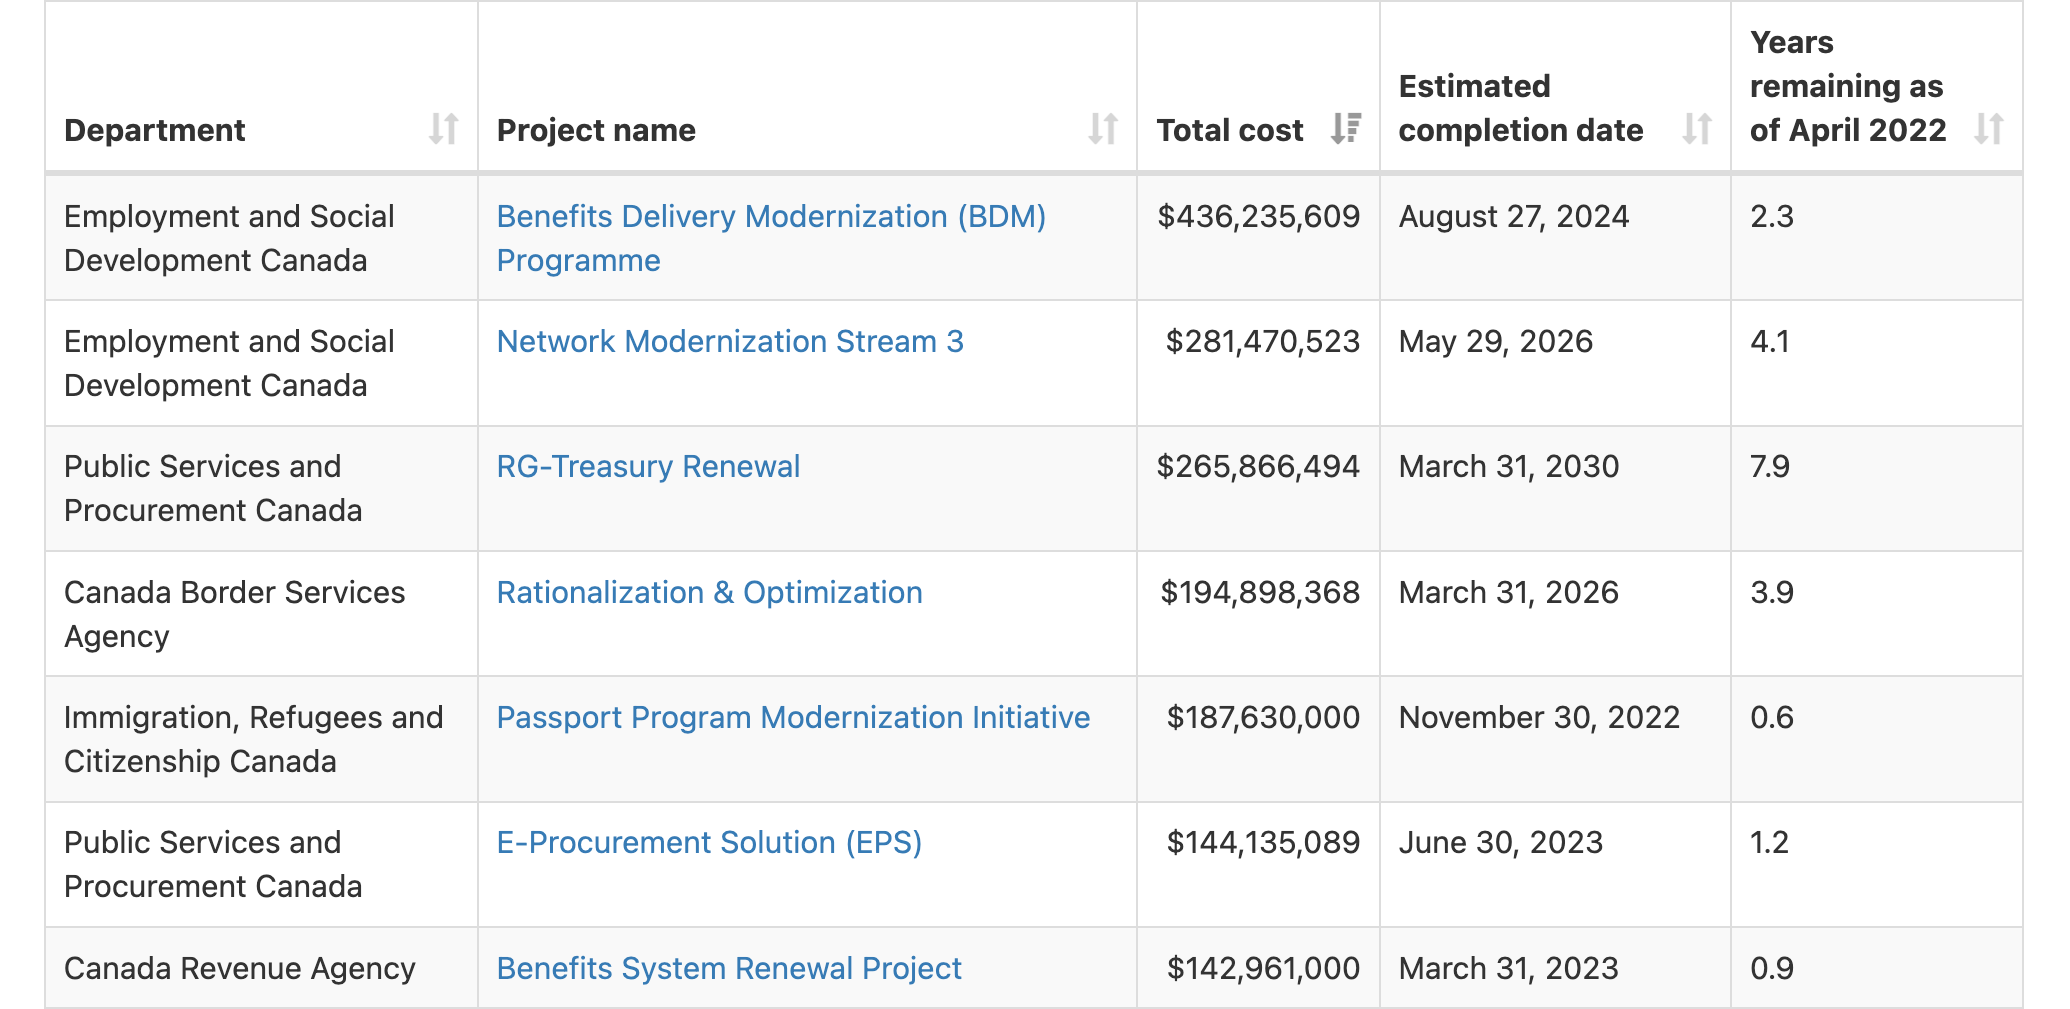 A screenshot from the 2022 dataset of large Government of Canada IT projects. At the top of the list is ESDC’s “Benefits Delivery Modernization Programme”, at $436 million dollars, followed by a series of projects from various departments in the $140 million to $280 million range. The “Years remaining” column ranges from just shy of a year, to almost 8 years.